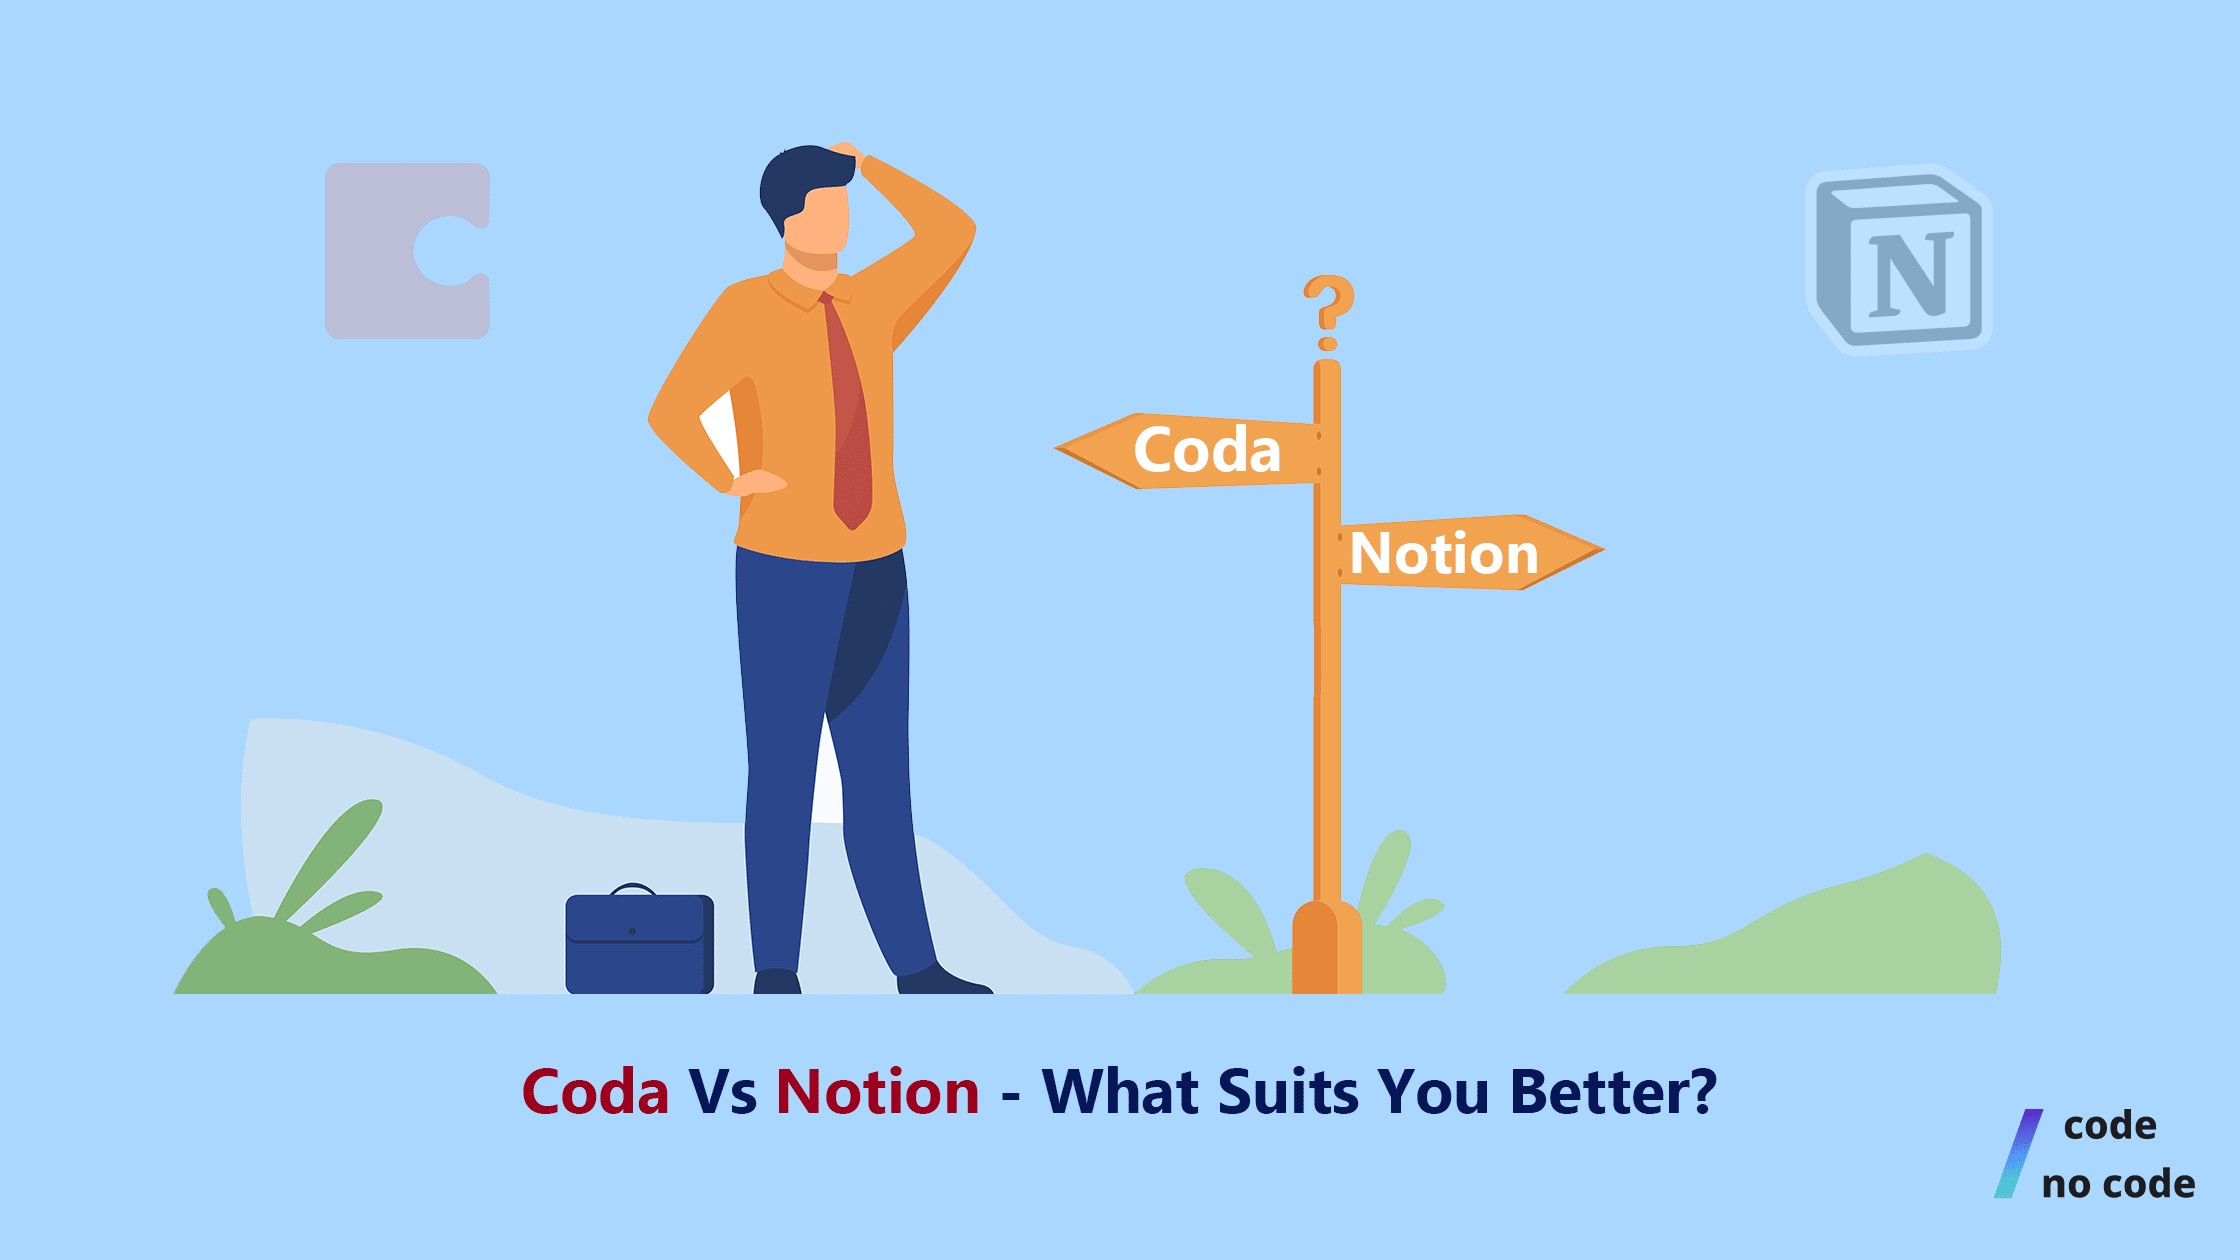 a man looking into the distance with the text "coda vs notion - what suits you better?"